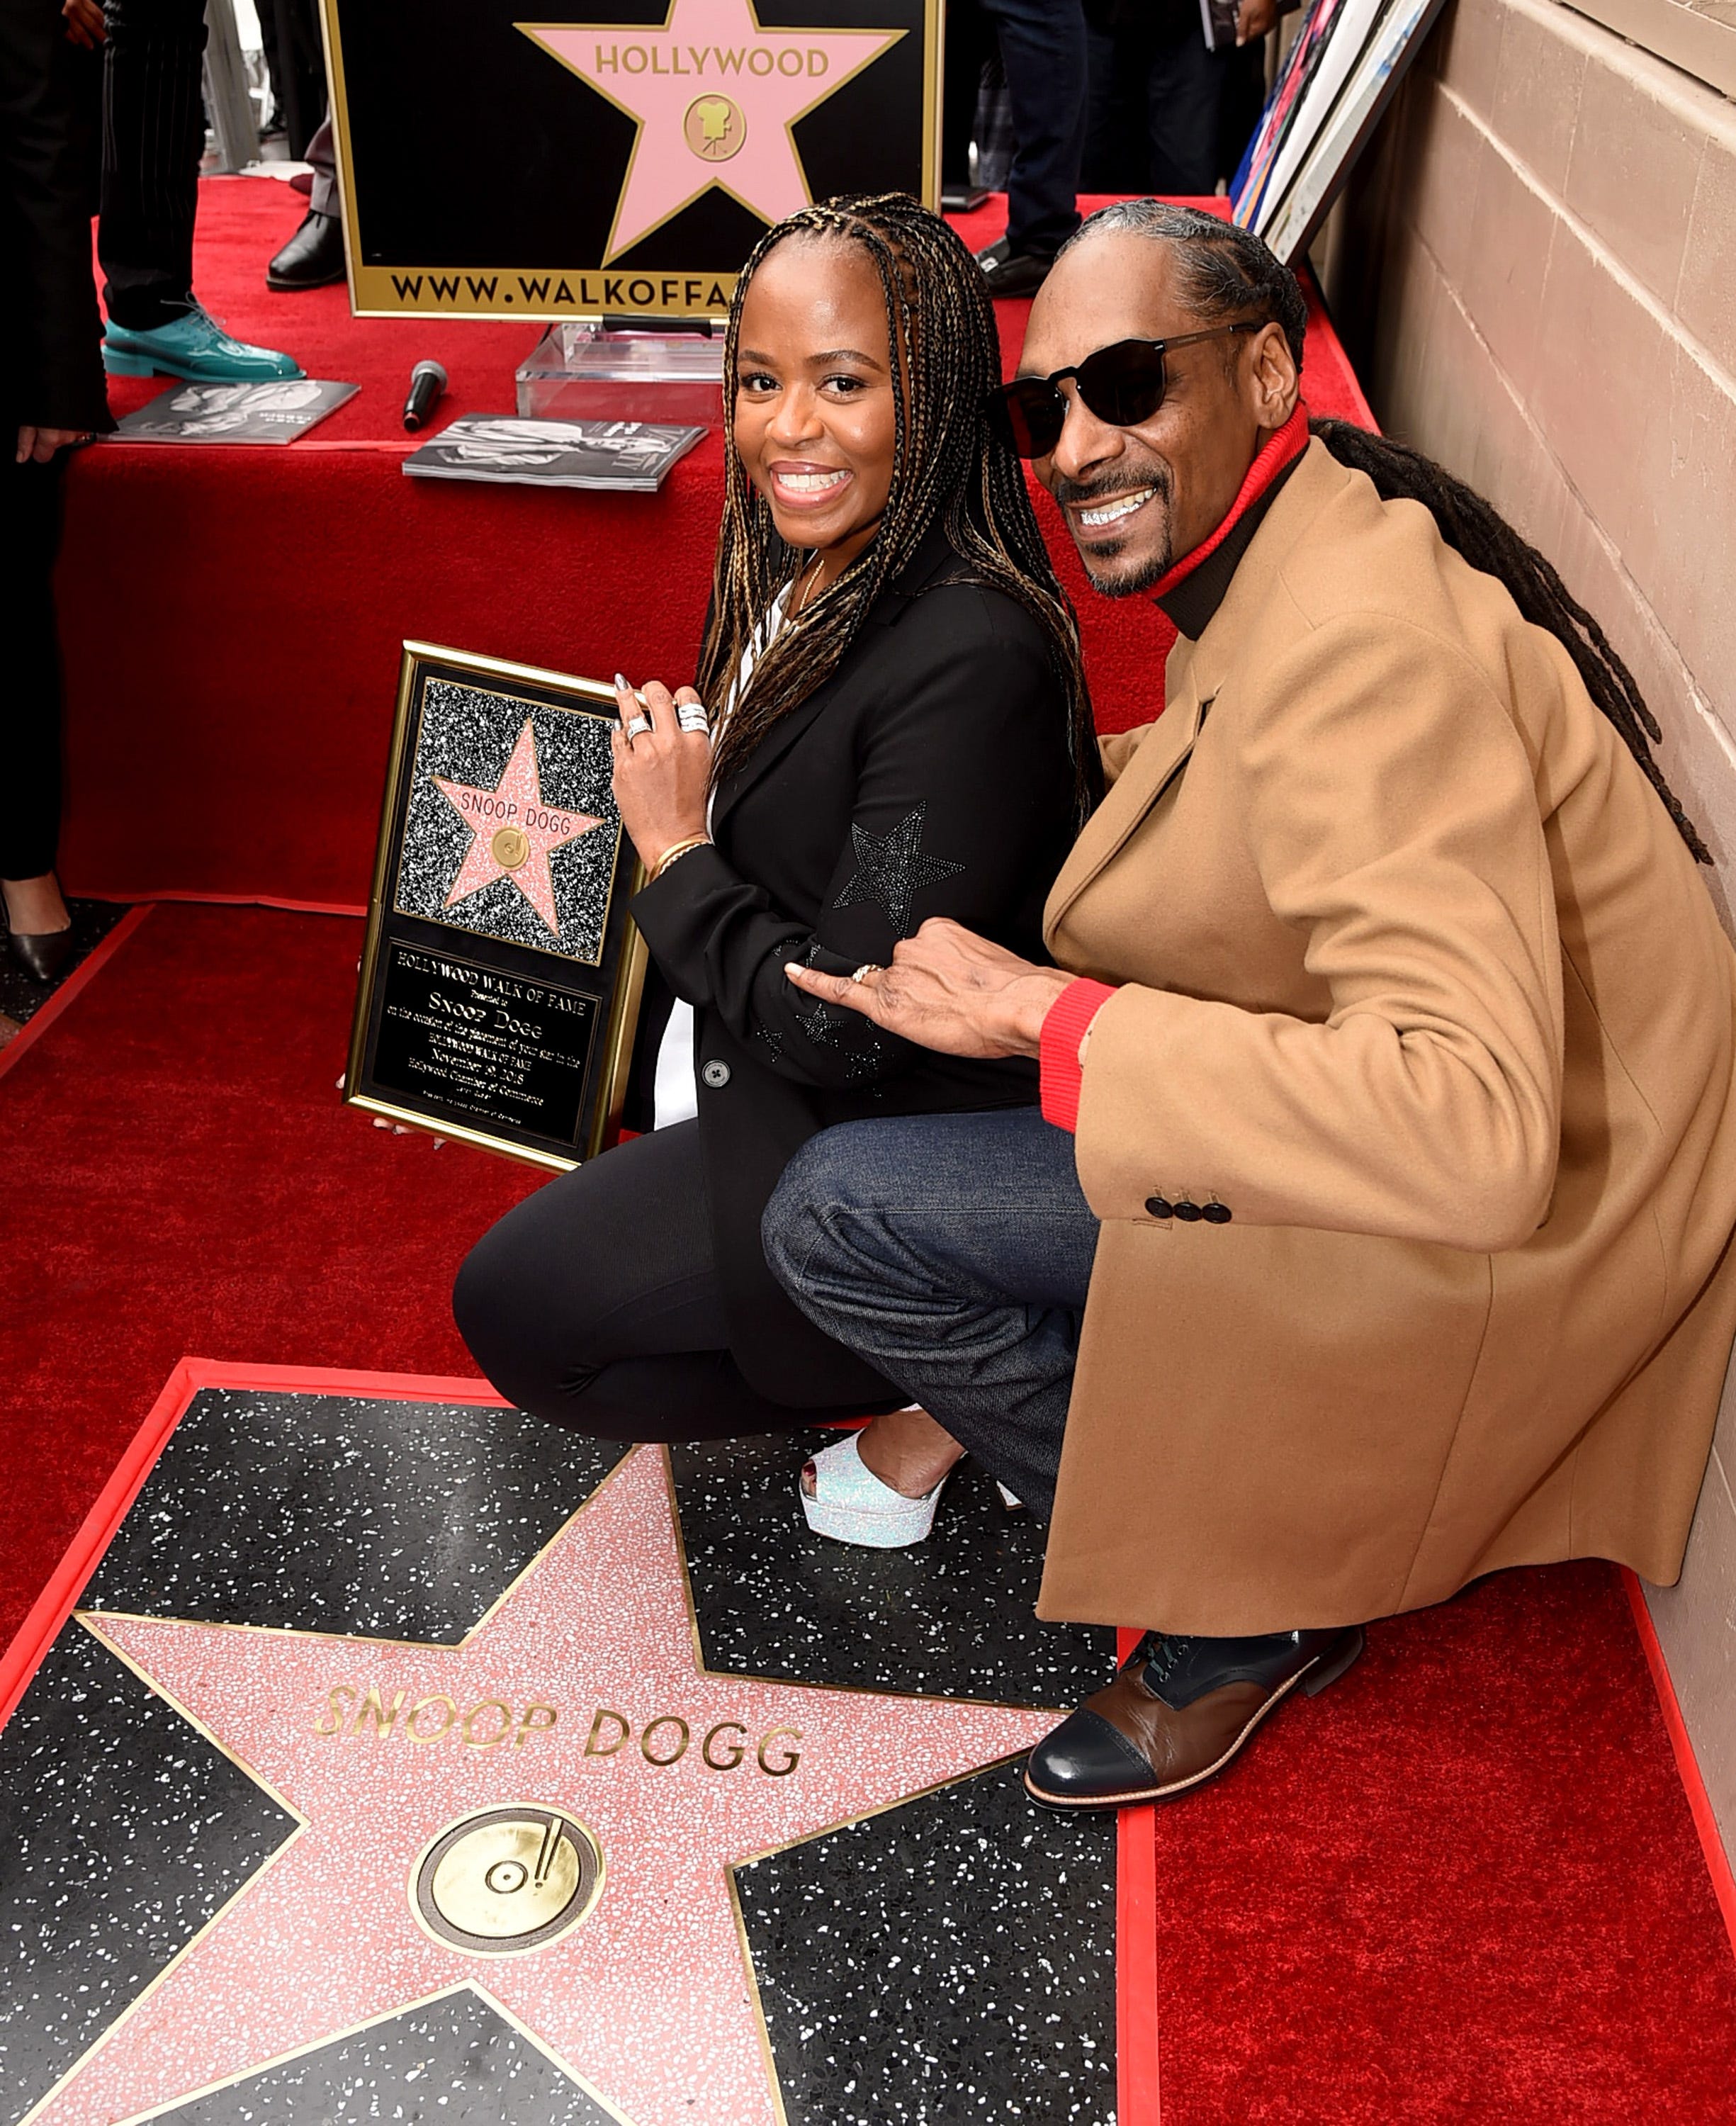 Snoop Dogg and his wife Shante Broadus were all smiles as the rapper and actor was honored with a star on the Hollywood Walk Of Fame on Nov. 19, 2018.